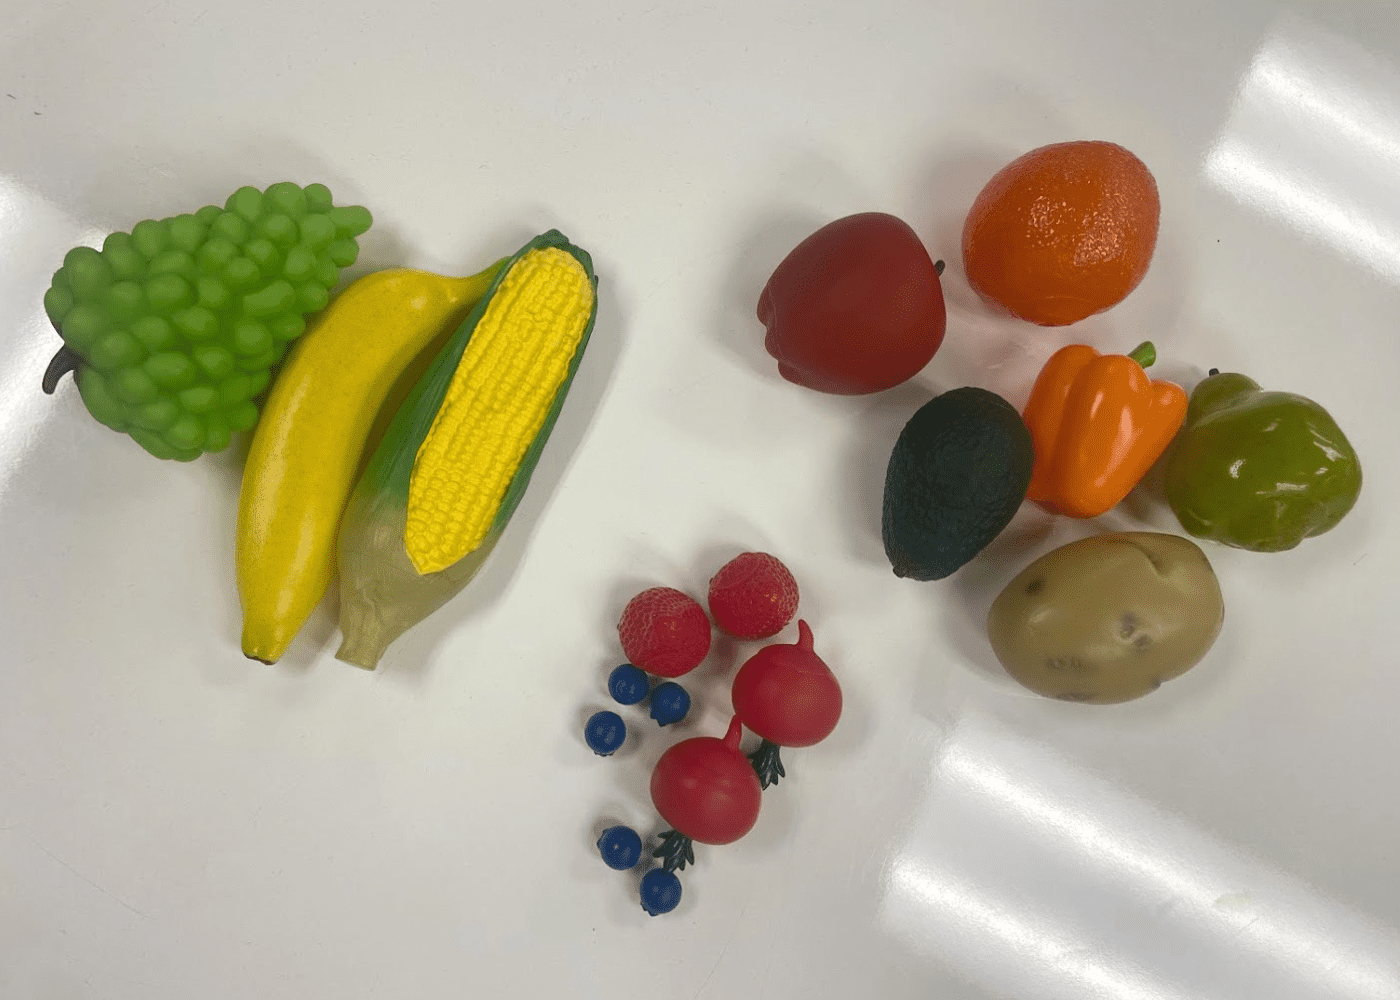 plastic fruits and vegetables sorted into categories based on size (small, medium, large)